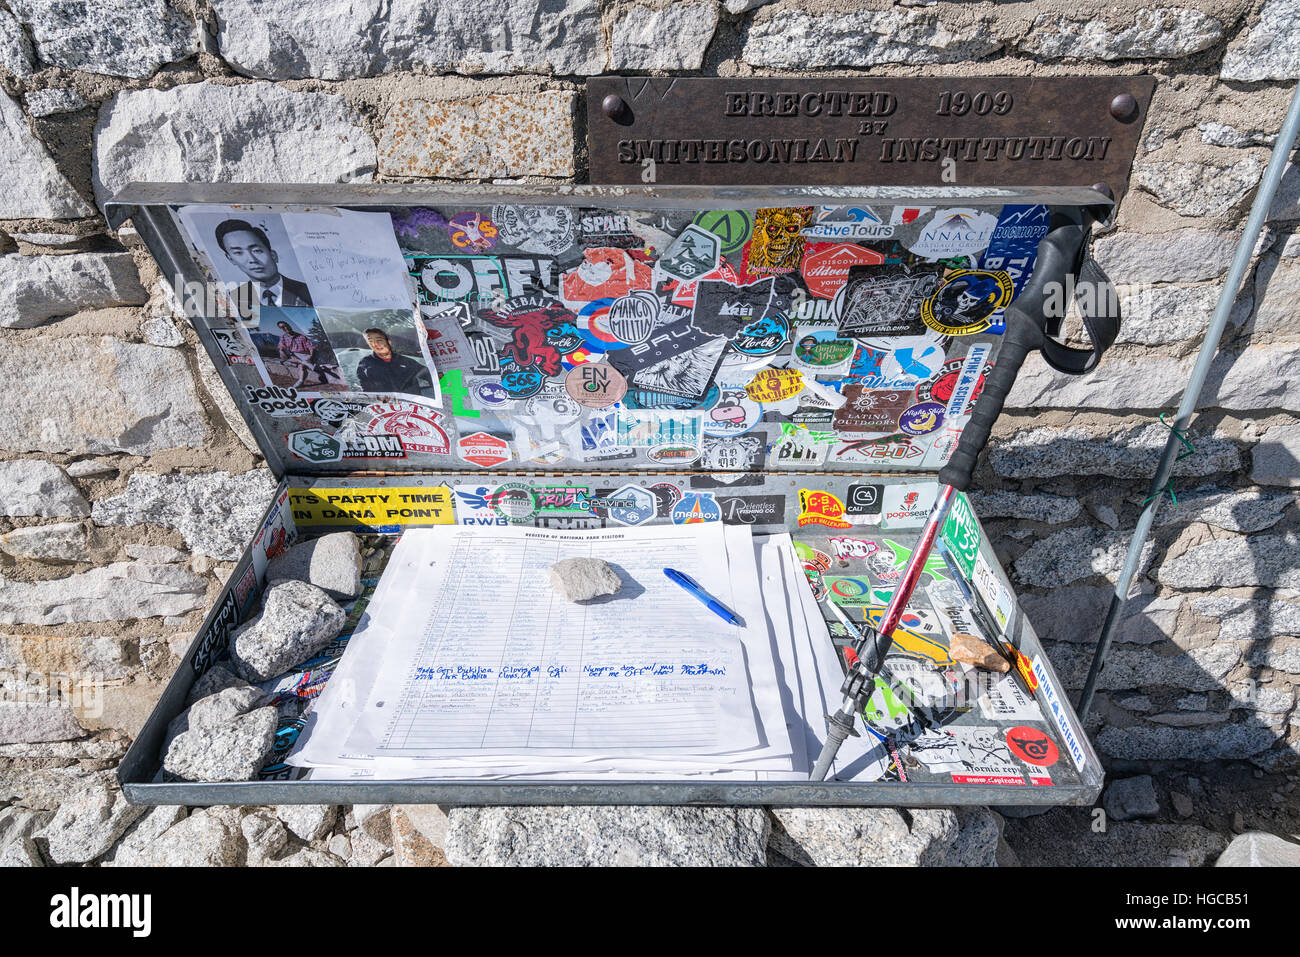 Guest book at the summit of Mount Whitney, Sequoia National Park, California, United States of America, North America Stock Photo